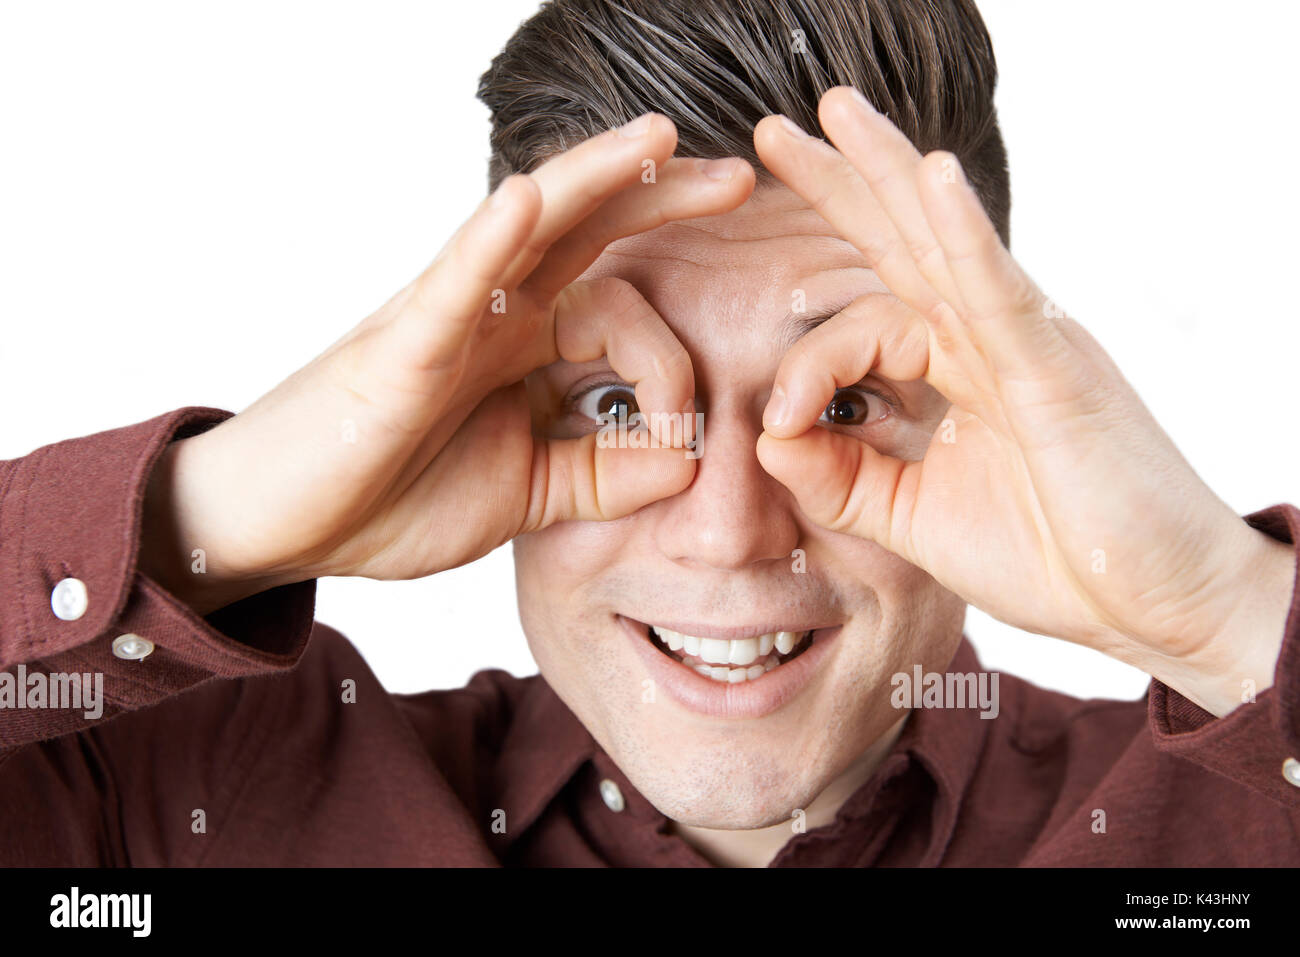 Studio Shot Of Man Making Spectacle Shape With His Hands Stock Photo